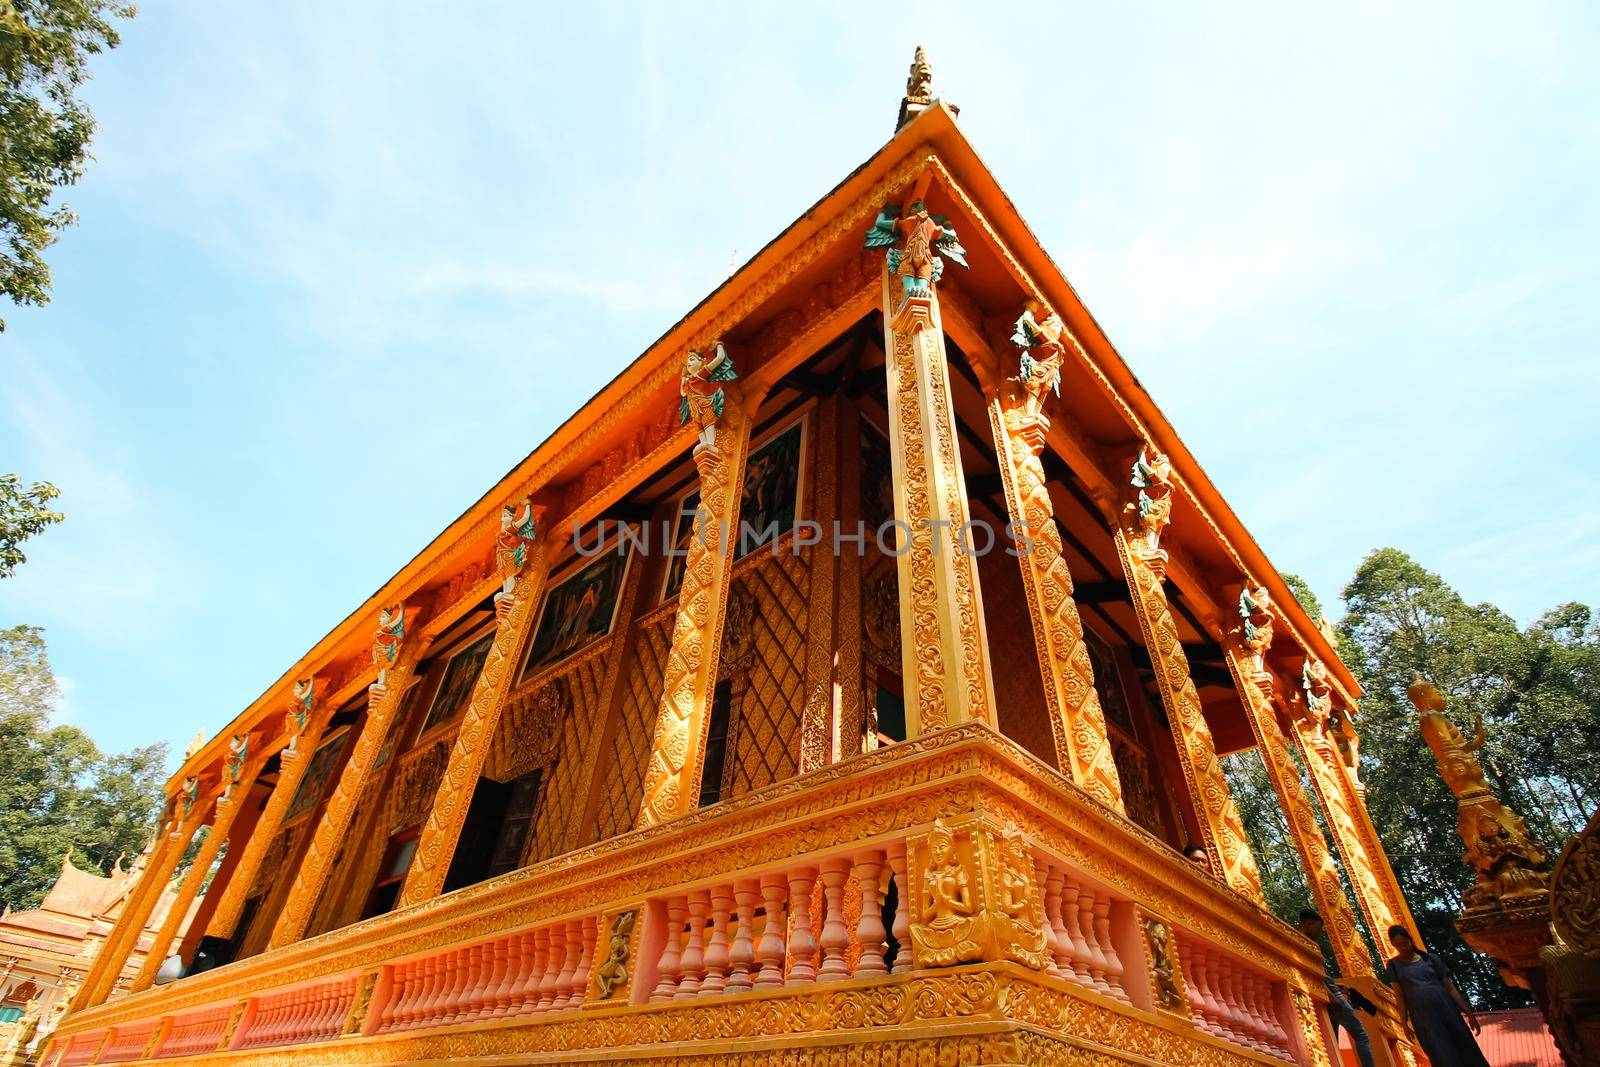 Low angle view of Chua Phu Ly, a Khmer or Cambodian Buddhist temple in Can tho, Vietnam